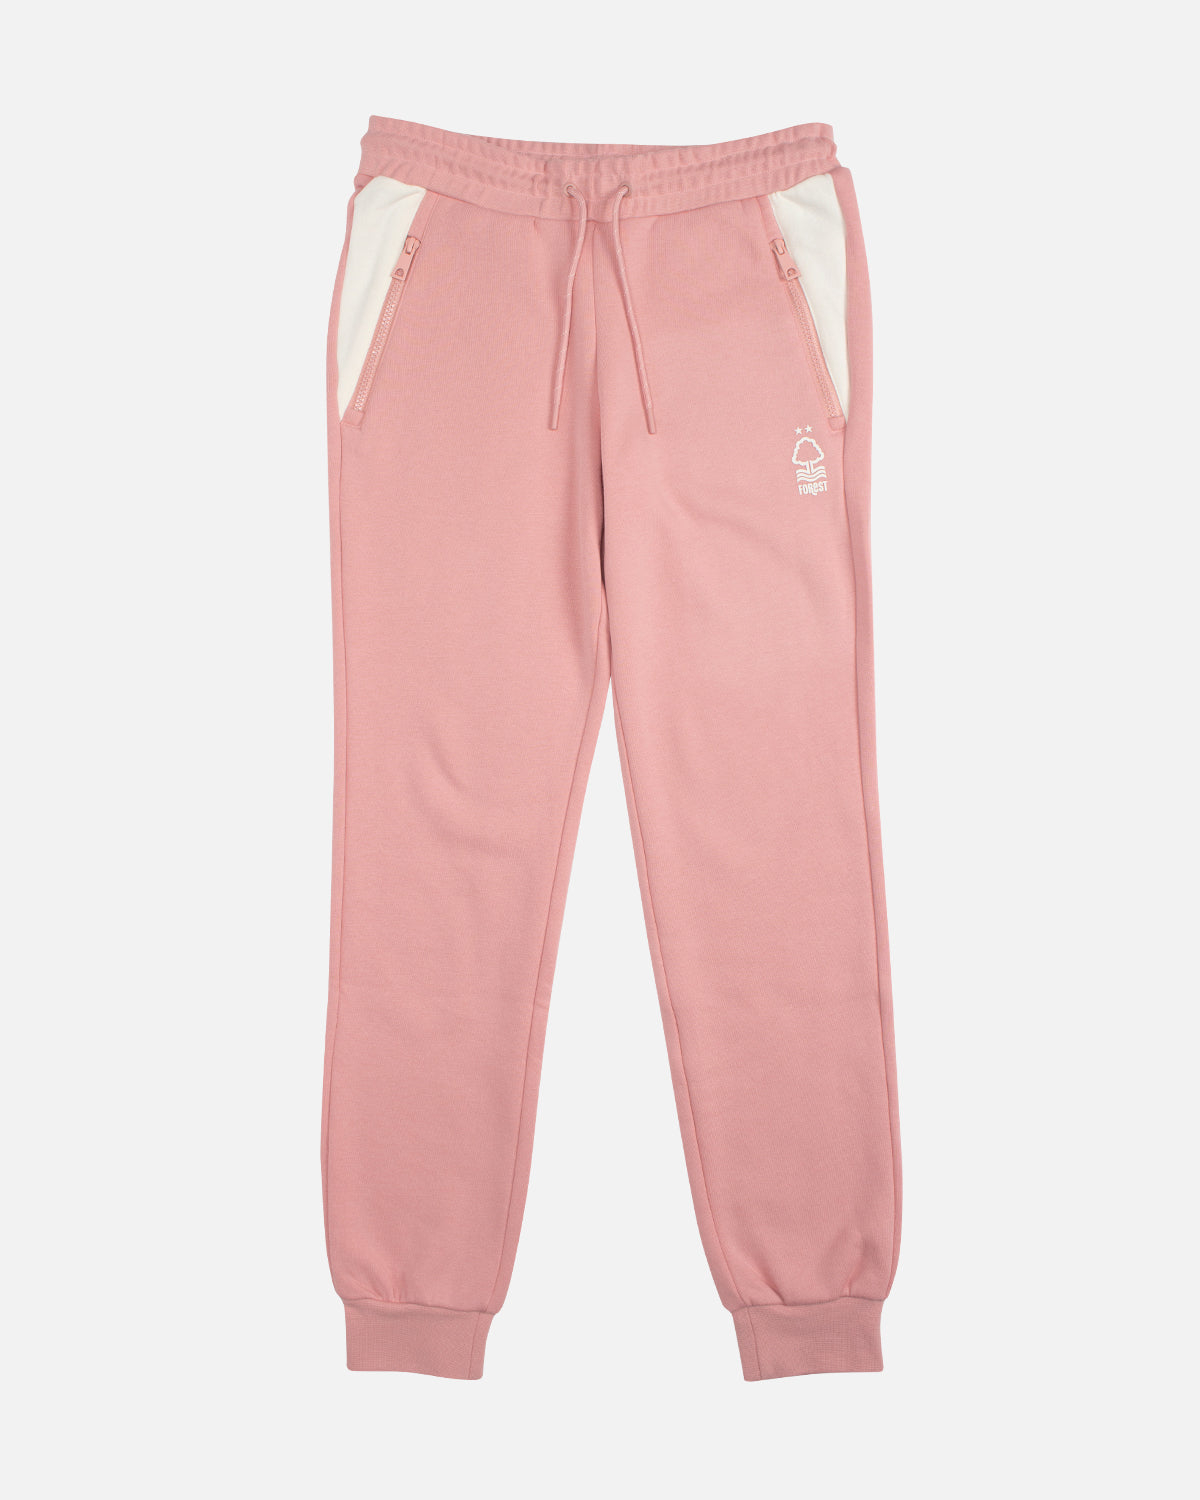 NFFC Womens Peach Joggers - Nottingham Forest FC